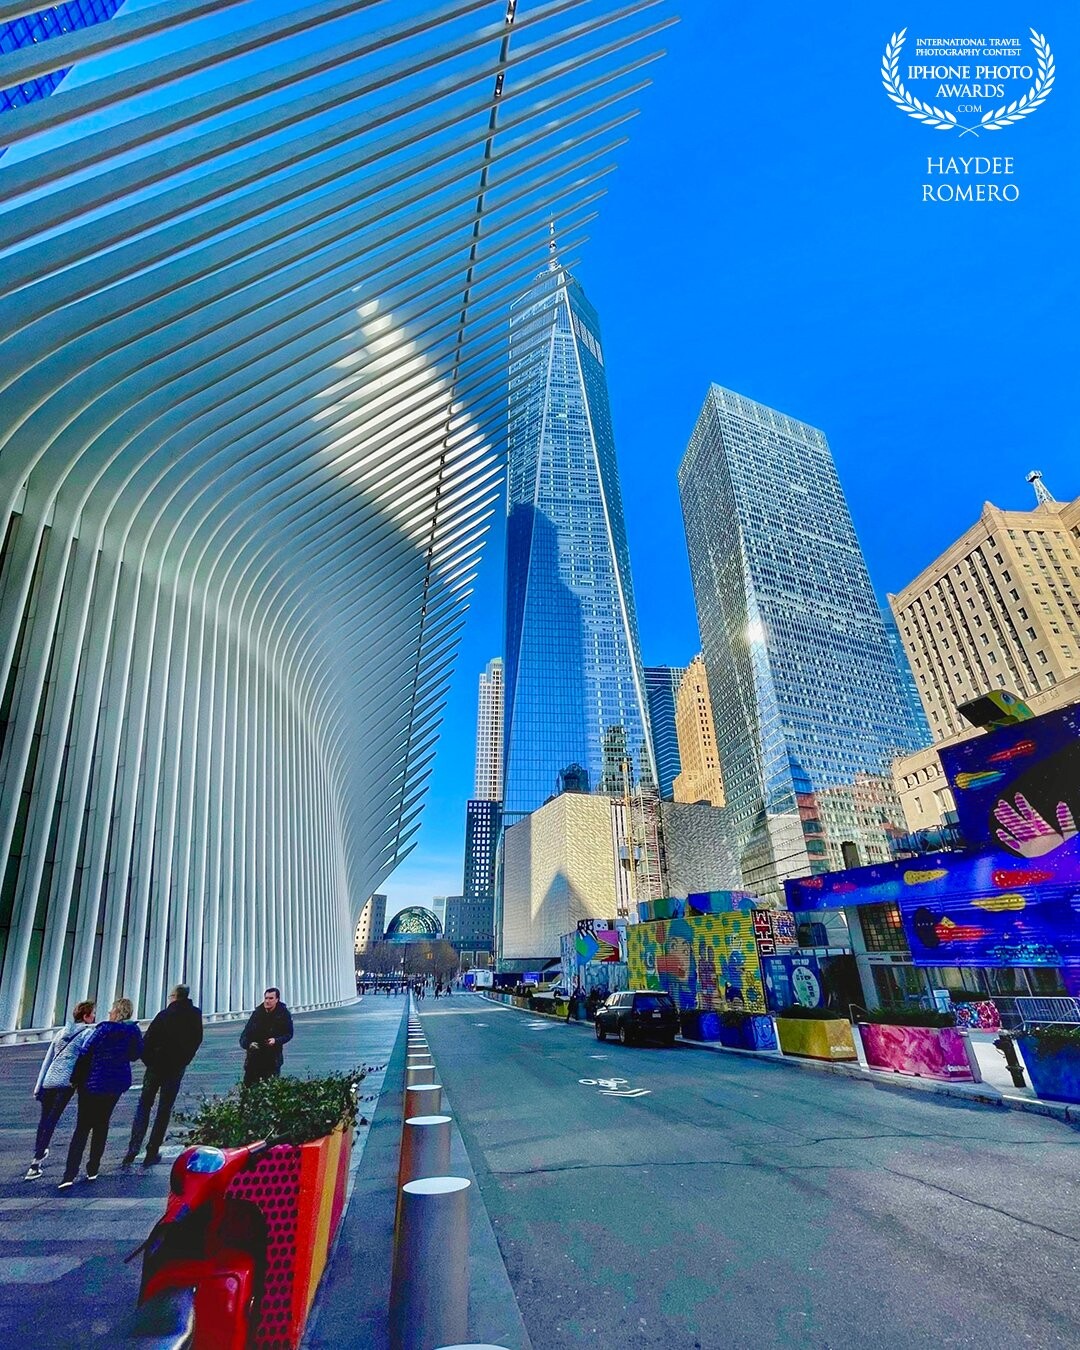 One wing of the Oculus building with the World Trade Center at the front. The structure of the Oculus is the portrayal of a bird about to take a flight, it was designed by the architect Santiago Calatrava.